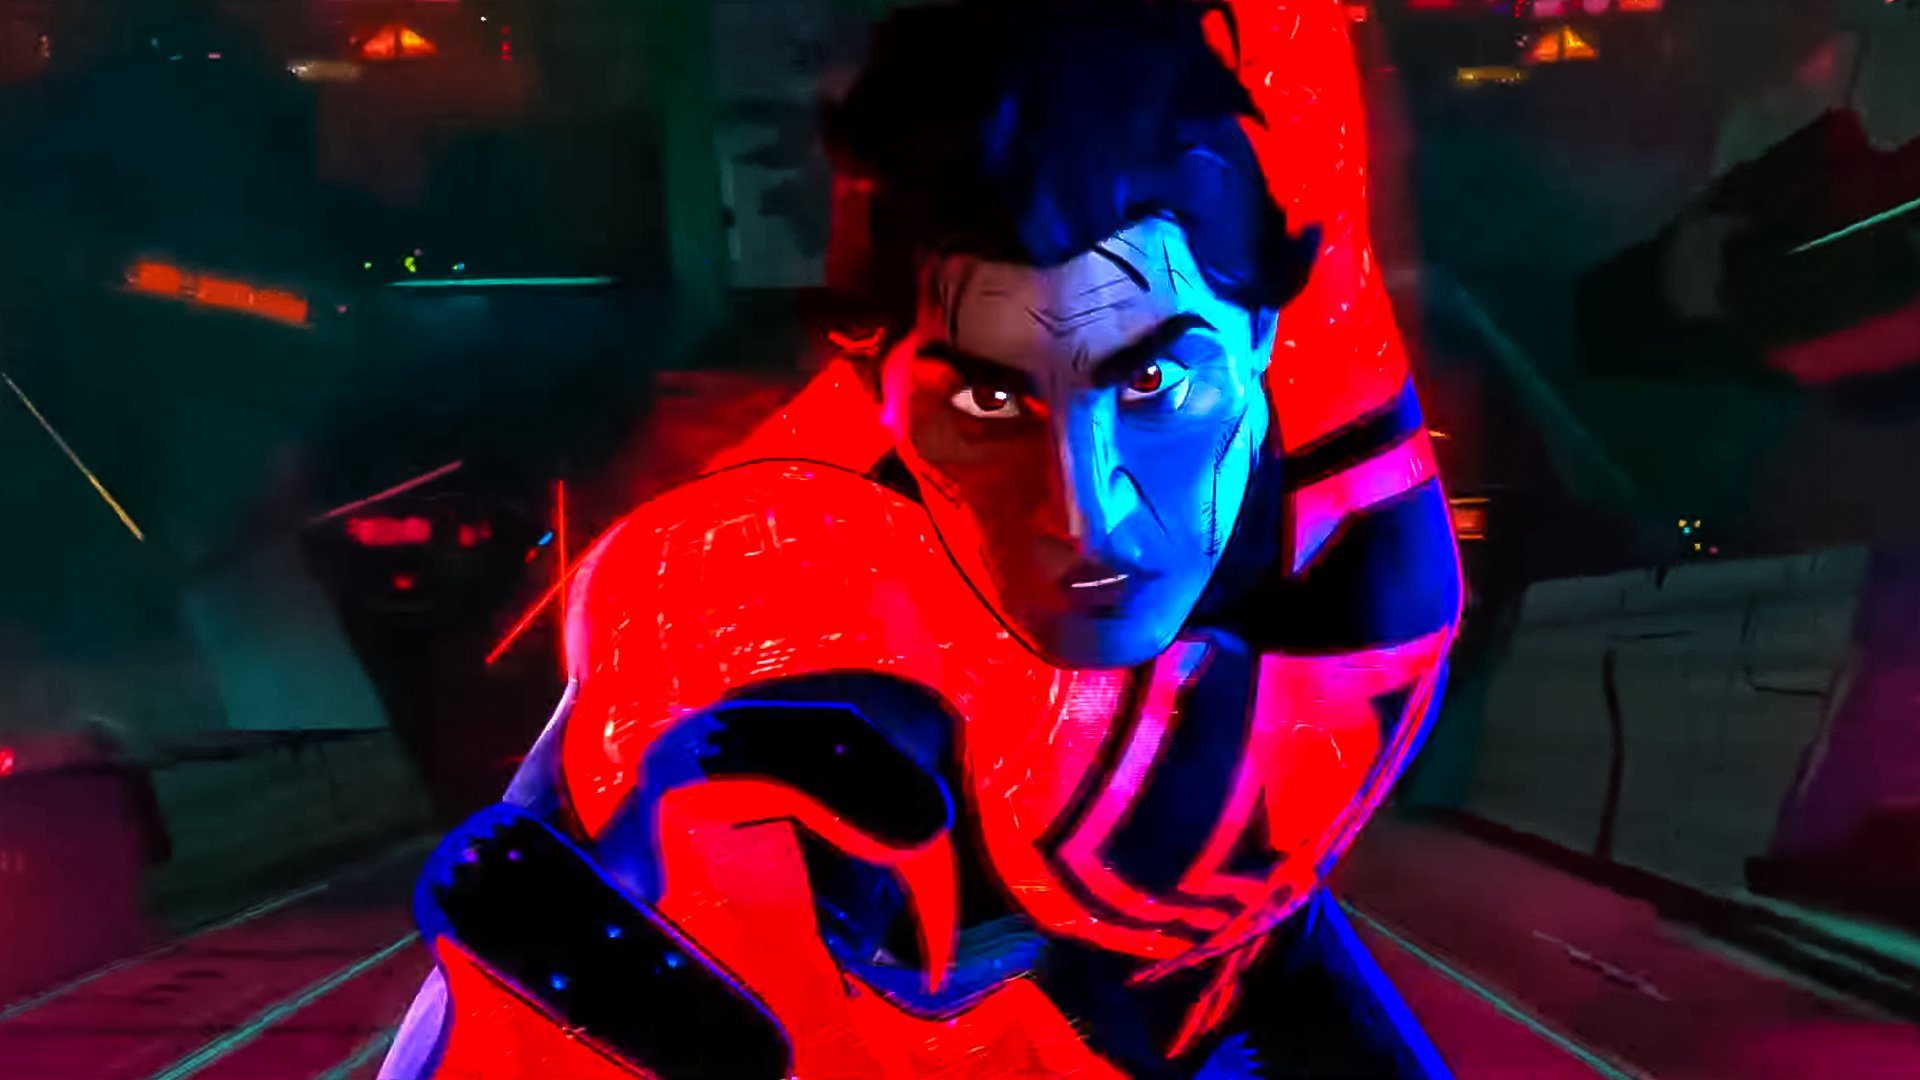 Twitter 上的MCU Direct：Here's The First Look At Oscar Isaac's Unmasked Miguel O'Hara Aka Spider Man 2099 In #AcrossTheSpiderVerse! Watch The New Trailer